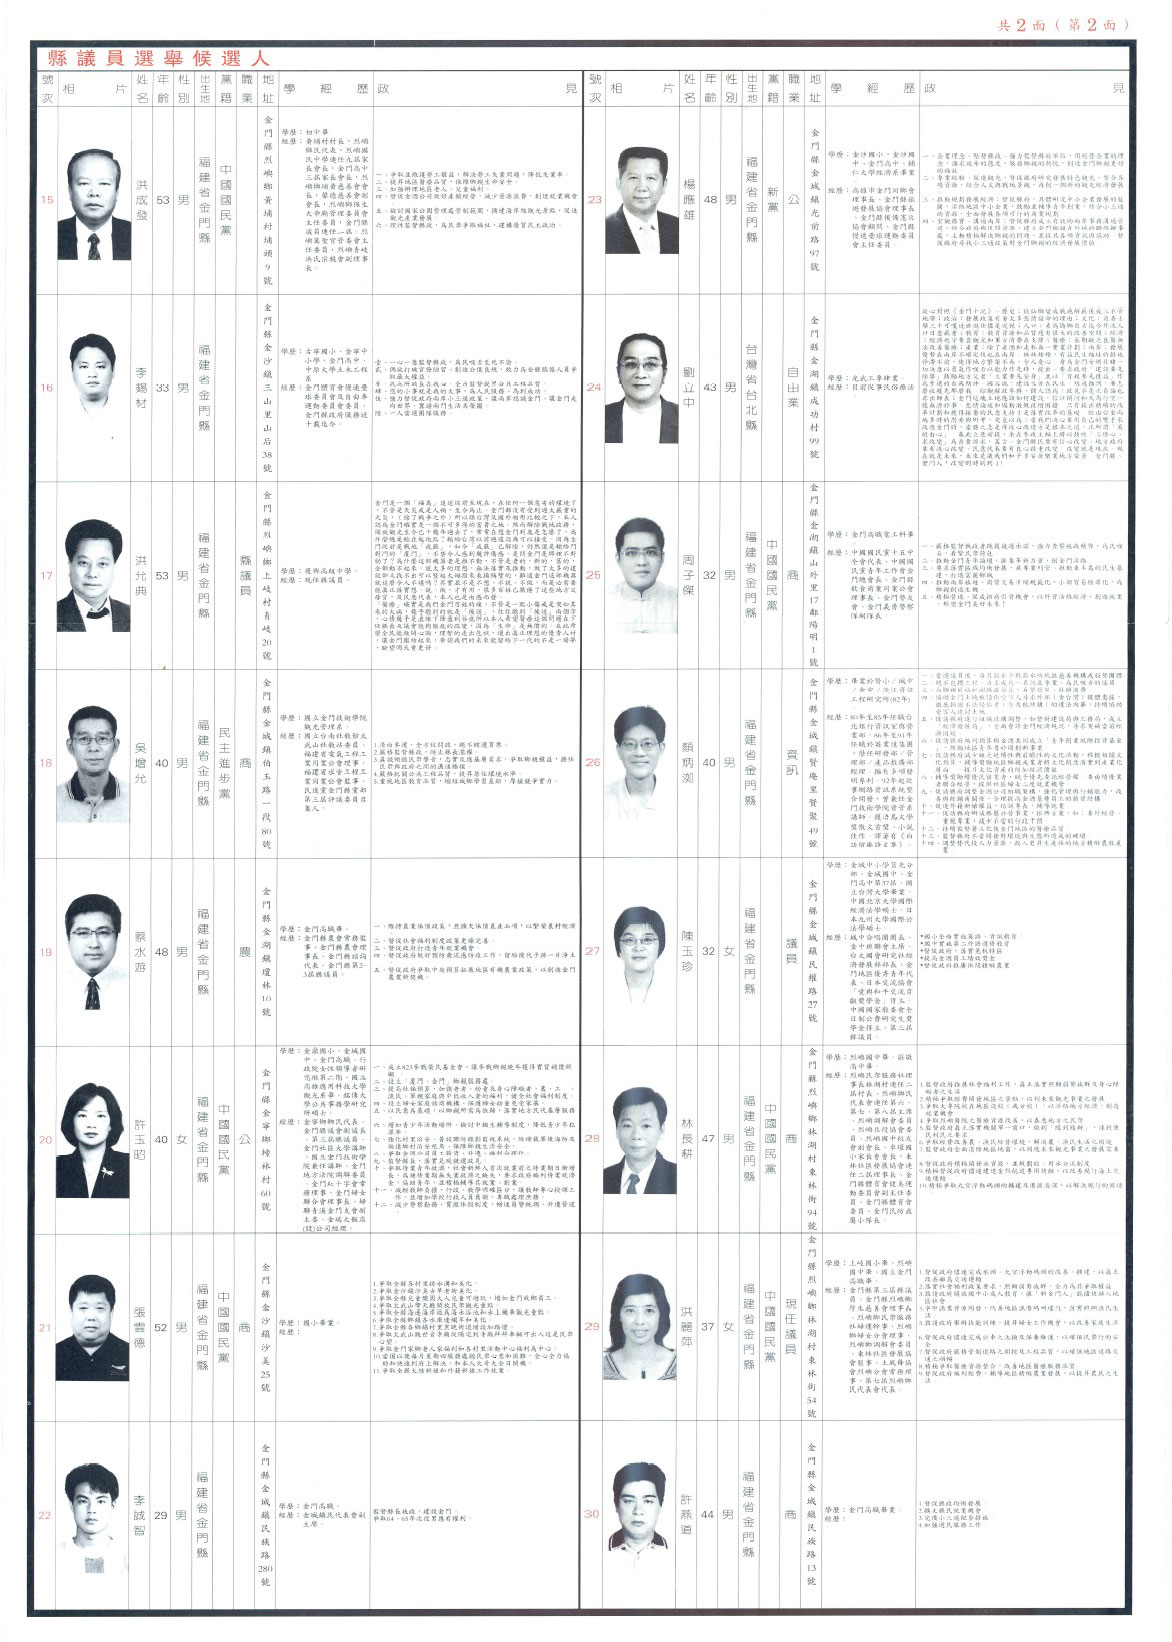 December 2005, the bulletin of the fourth Kinmen County Council Member election.